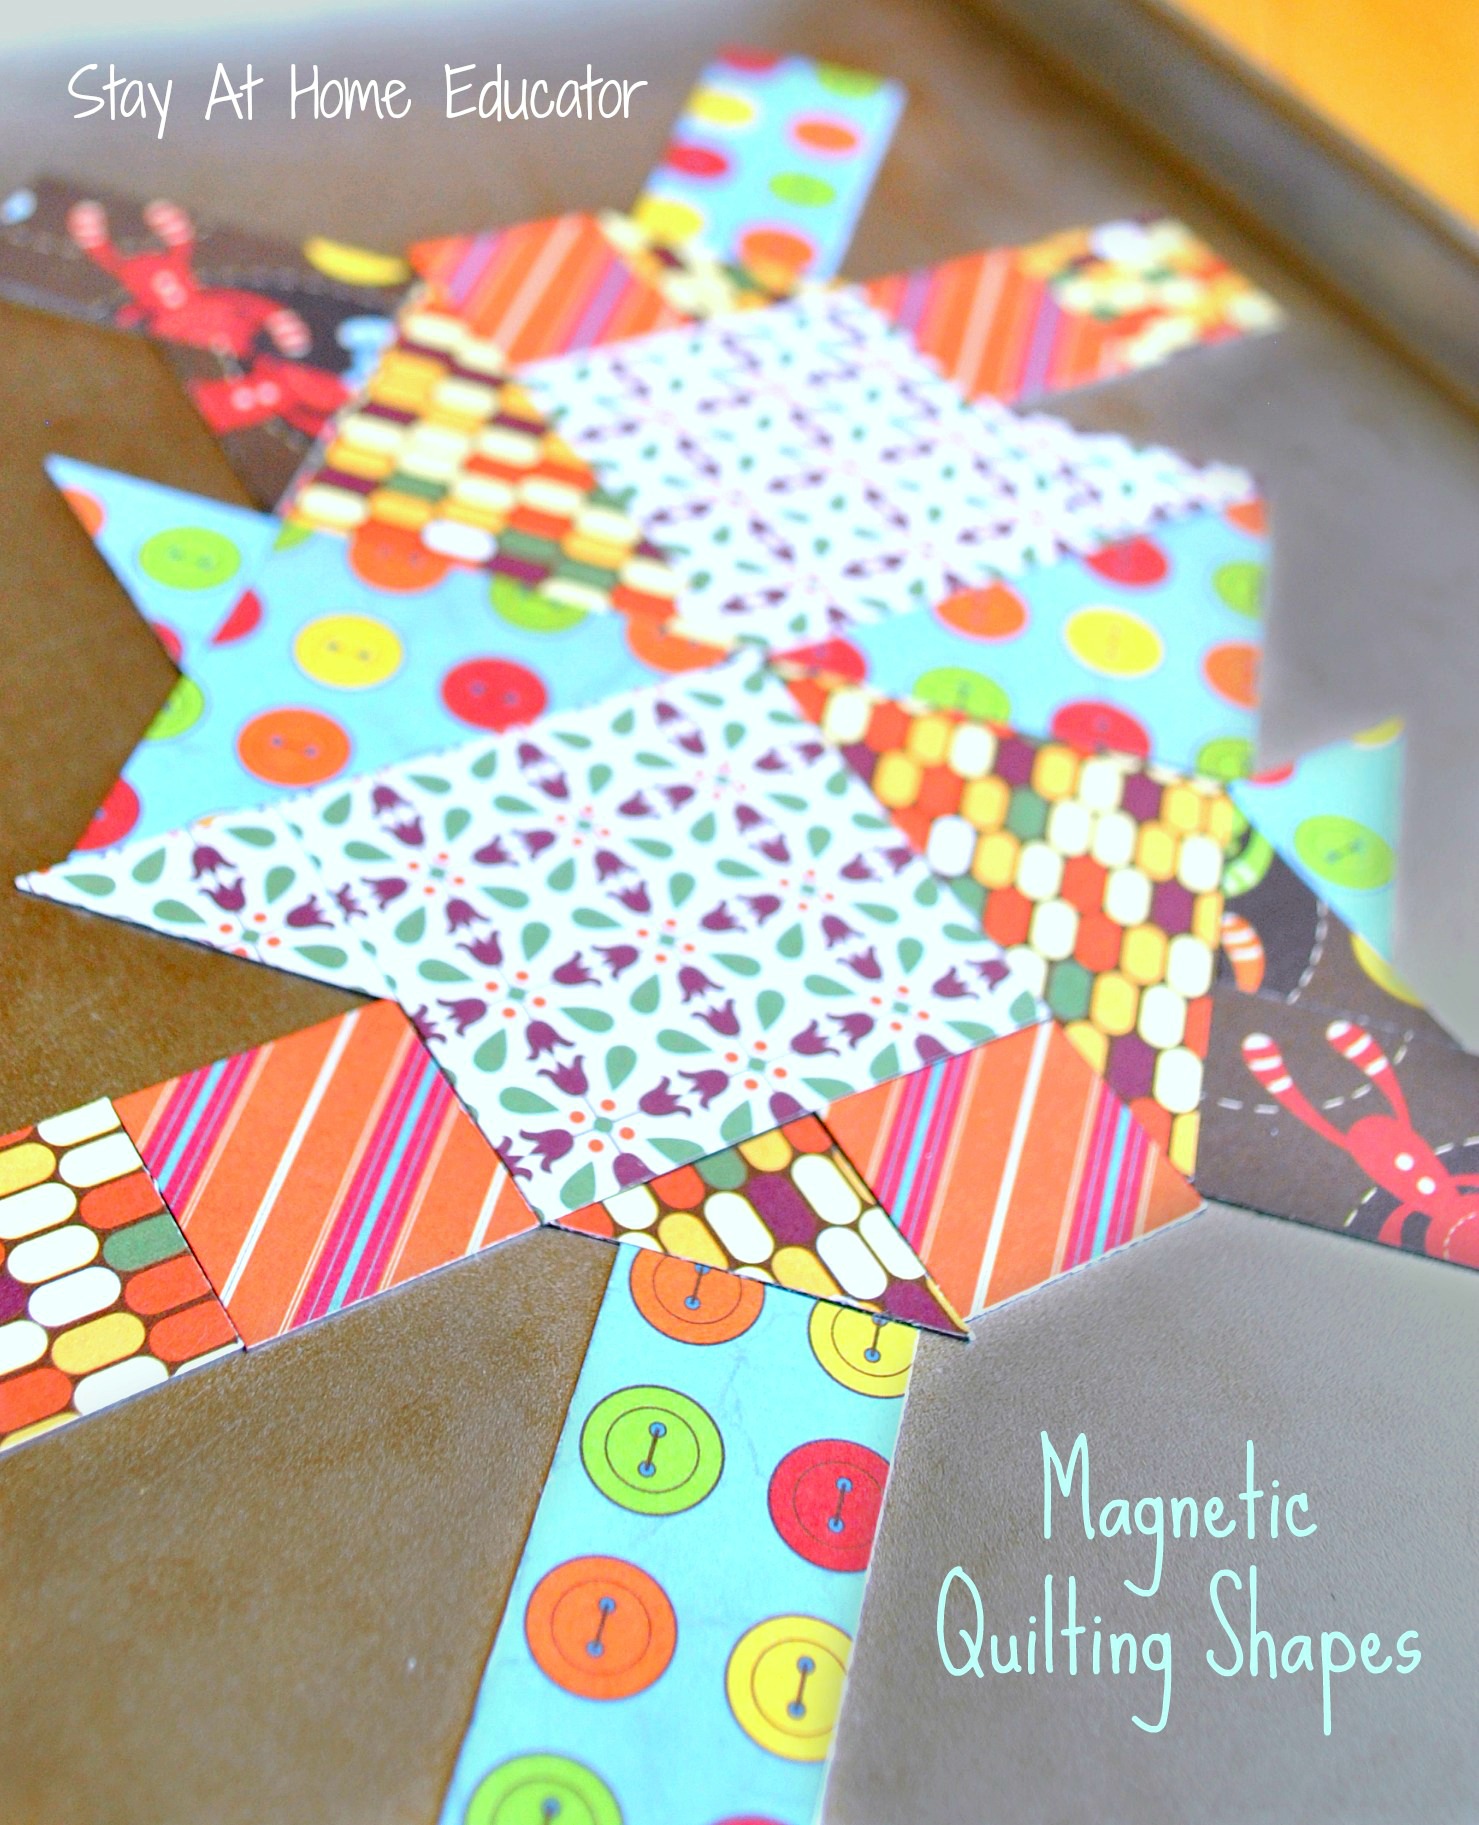 Magnetic Quilting Shapes - this is an excellent way to teach preschoolers concepts in geometry - Stay At Home Educator